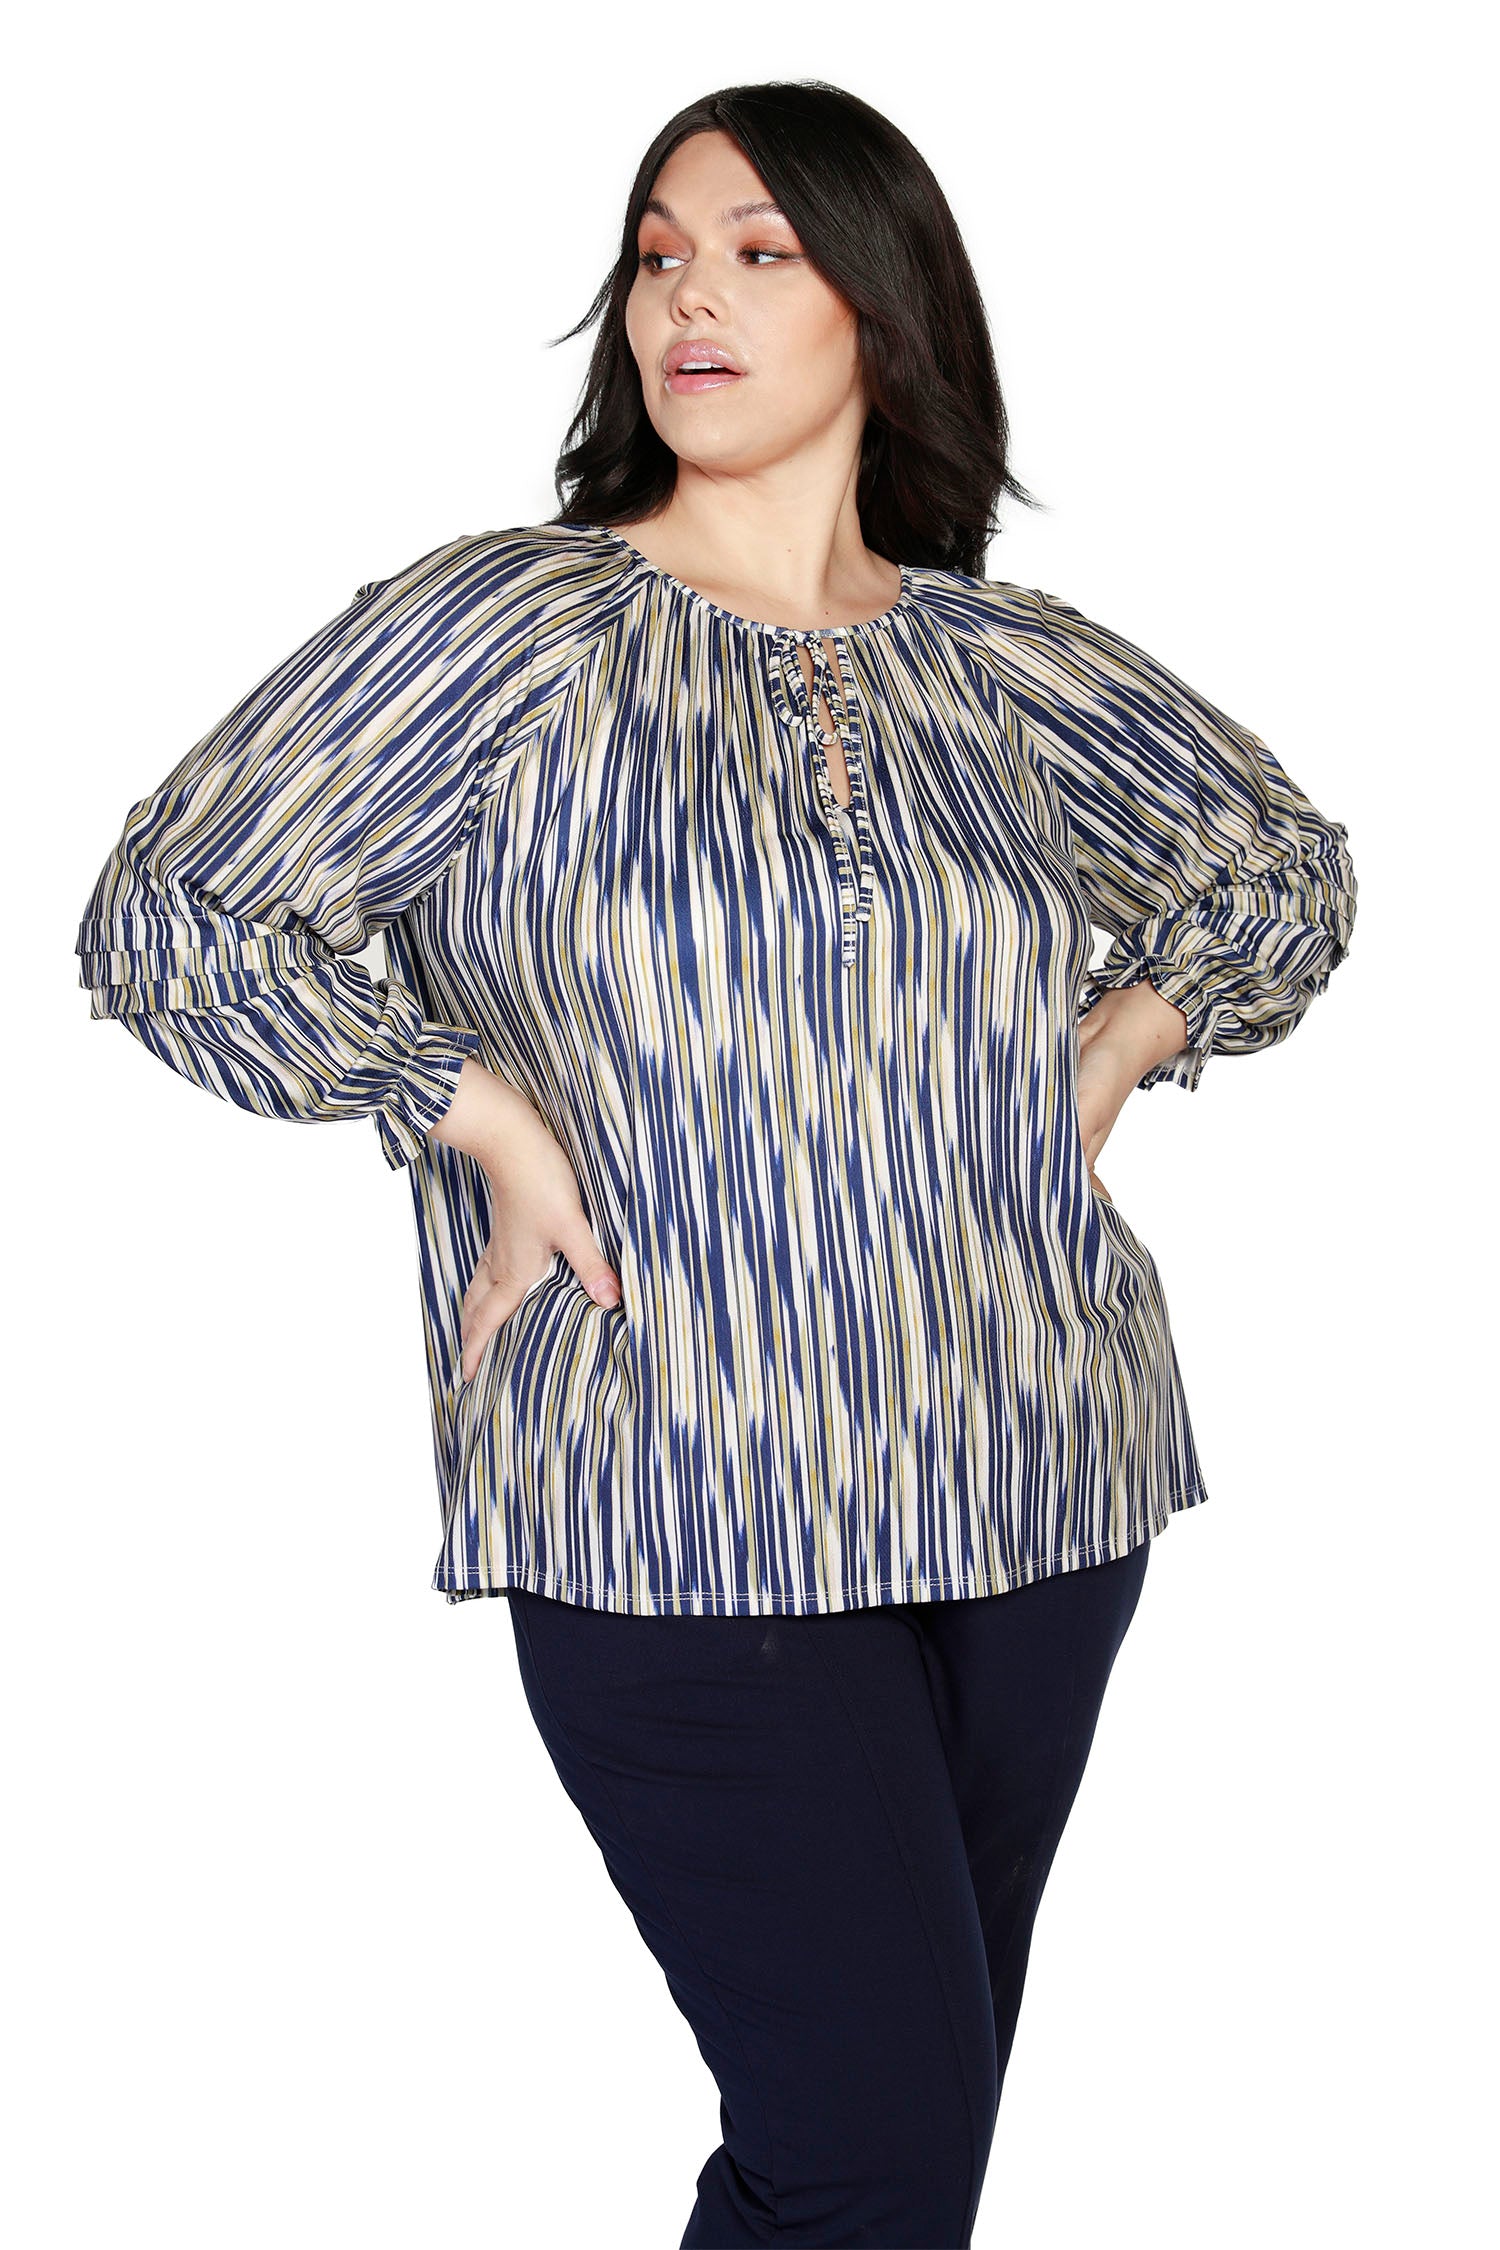 Women's Striped Knit Raglan Peasant Top with Keyhole Neck | Curvy - LAST CALL